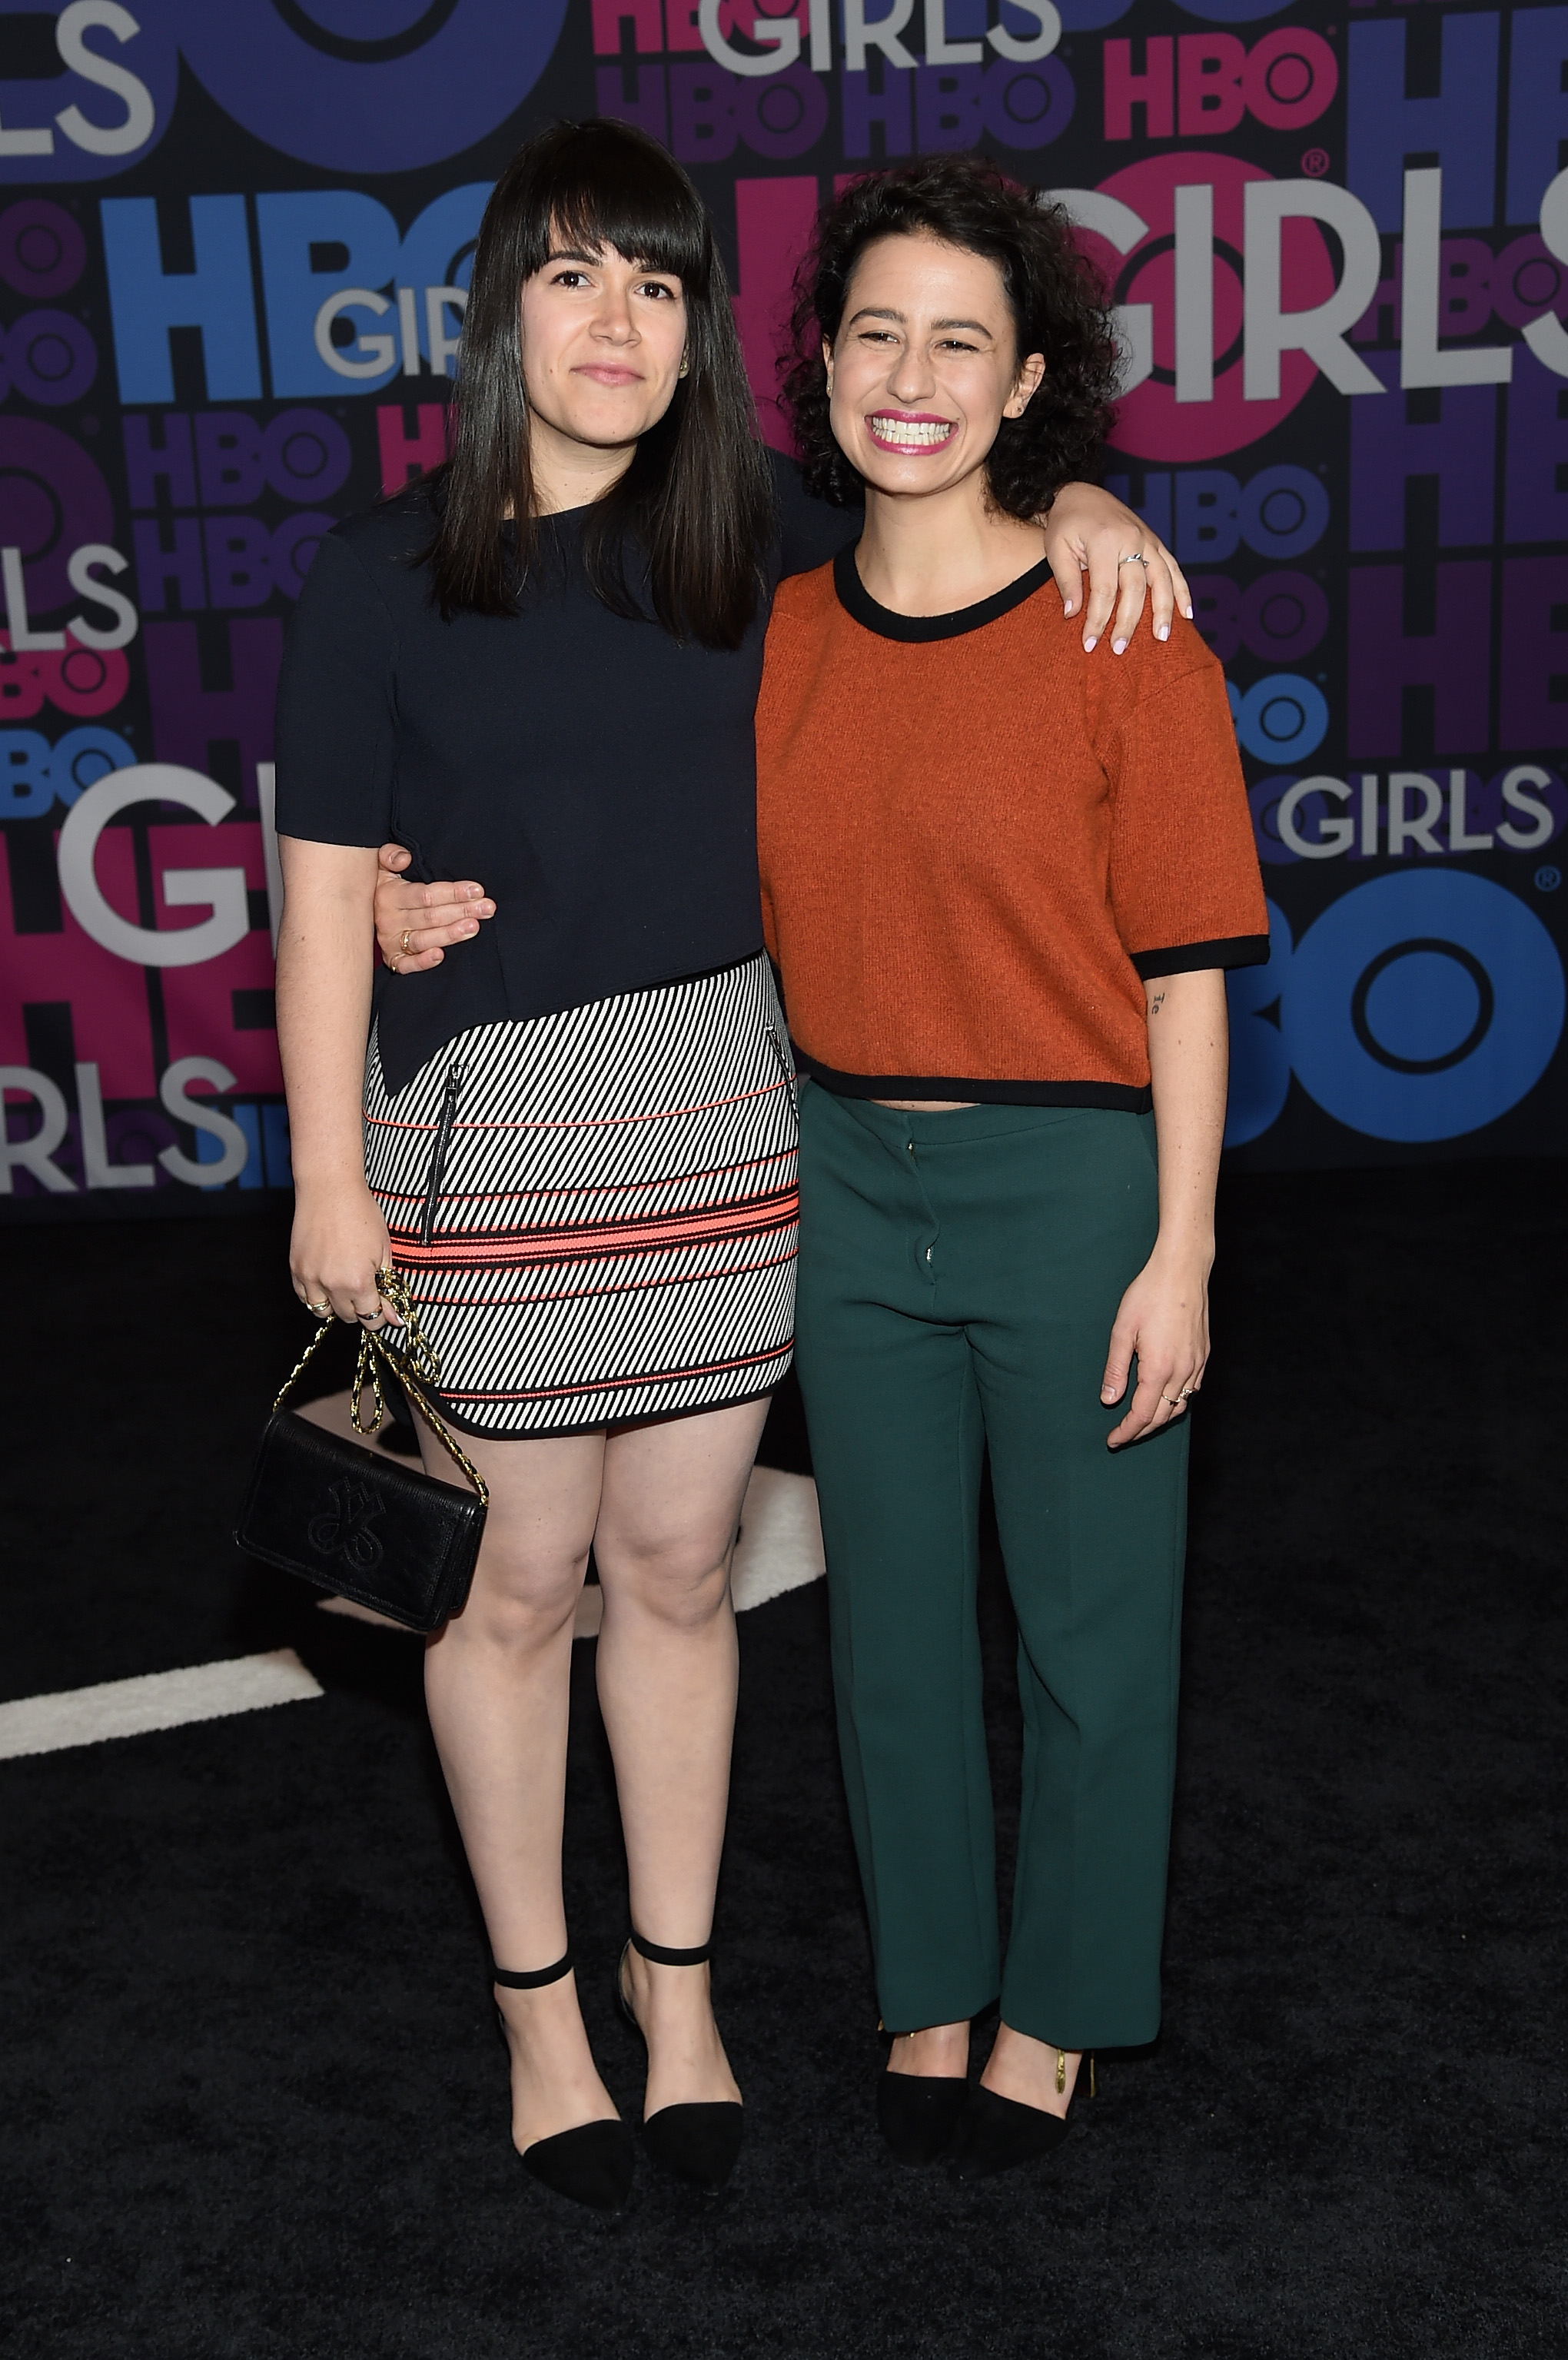 Actresses Abbi Jacobson and Ilana Glazer attend the "Girls" season four series premiere at American Museum of Natural History on January 5, 2015 in New York City | Source: Getty Images